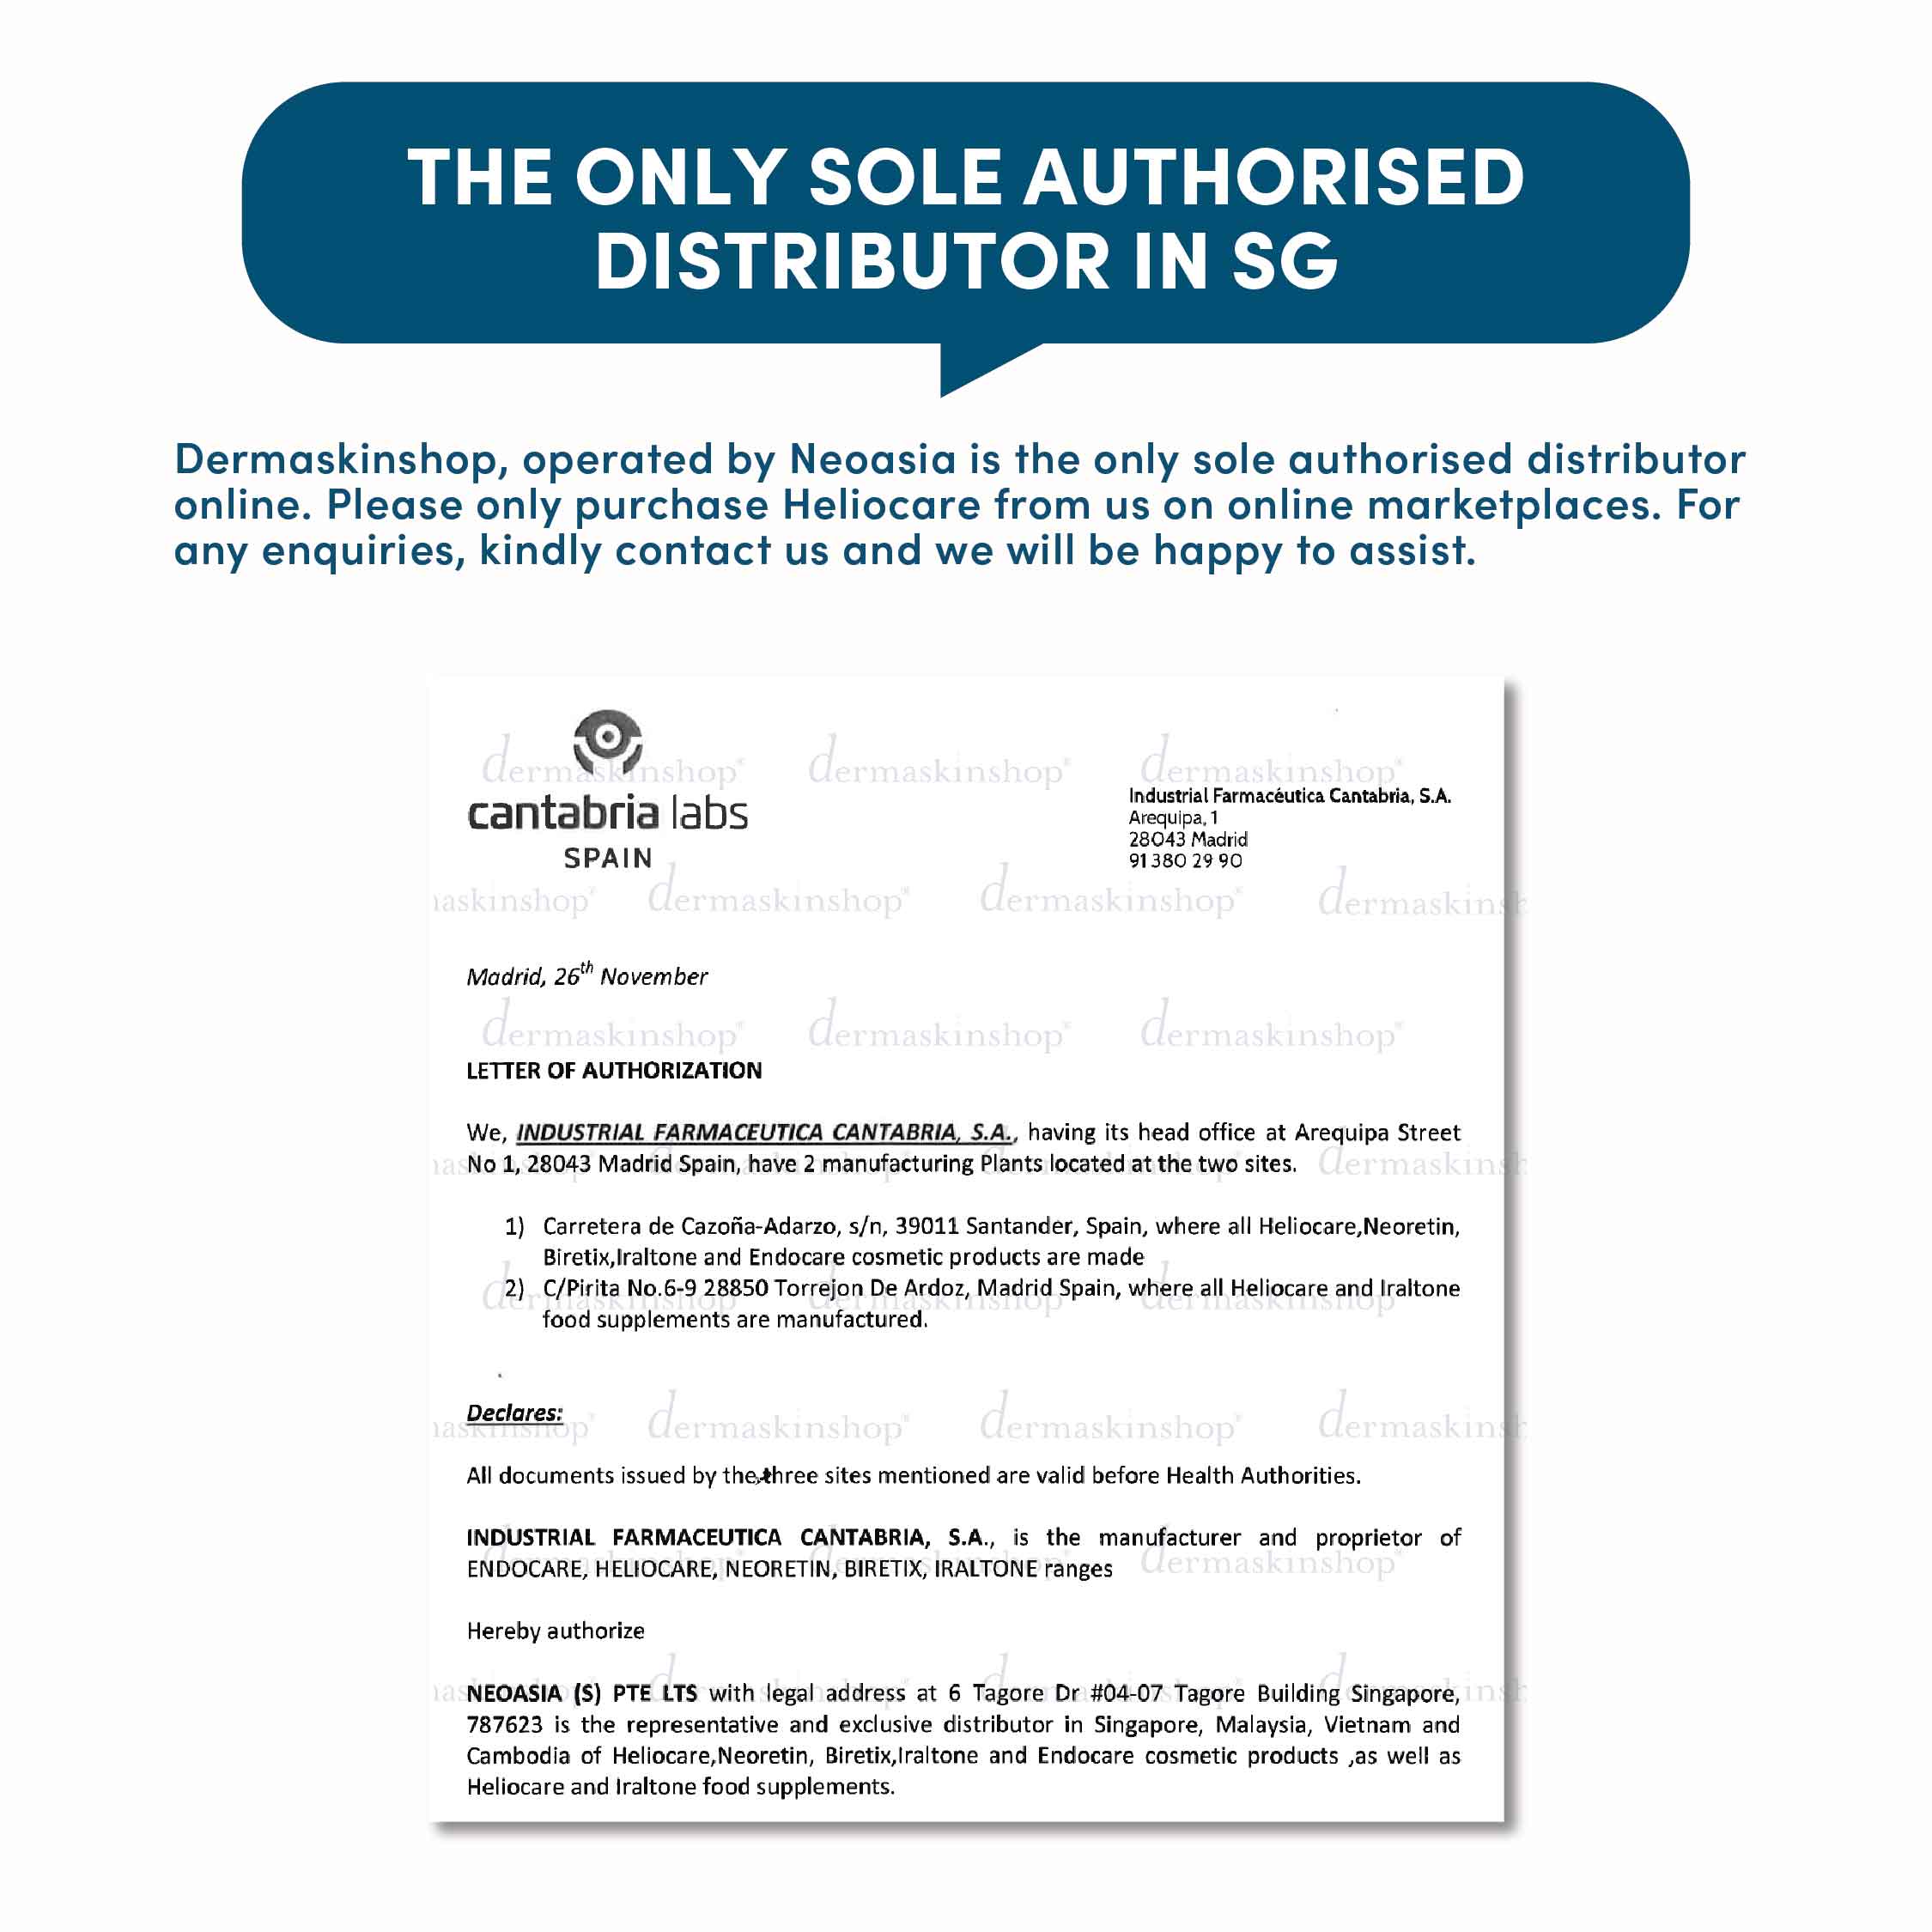 Letter of Authorisation: Dermaskinshop, under NeoAsia is the only sole authorised distributor of Heliocare in Singapore.